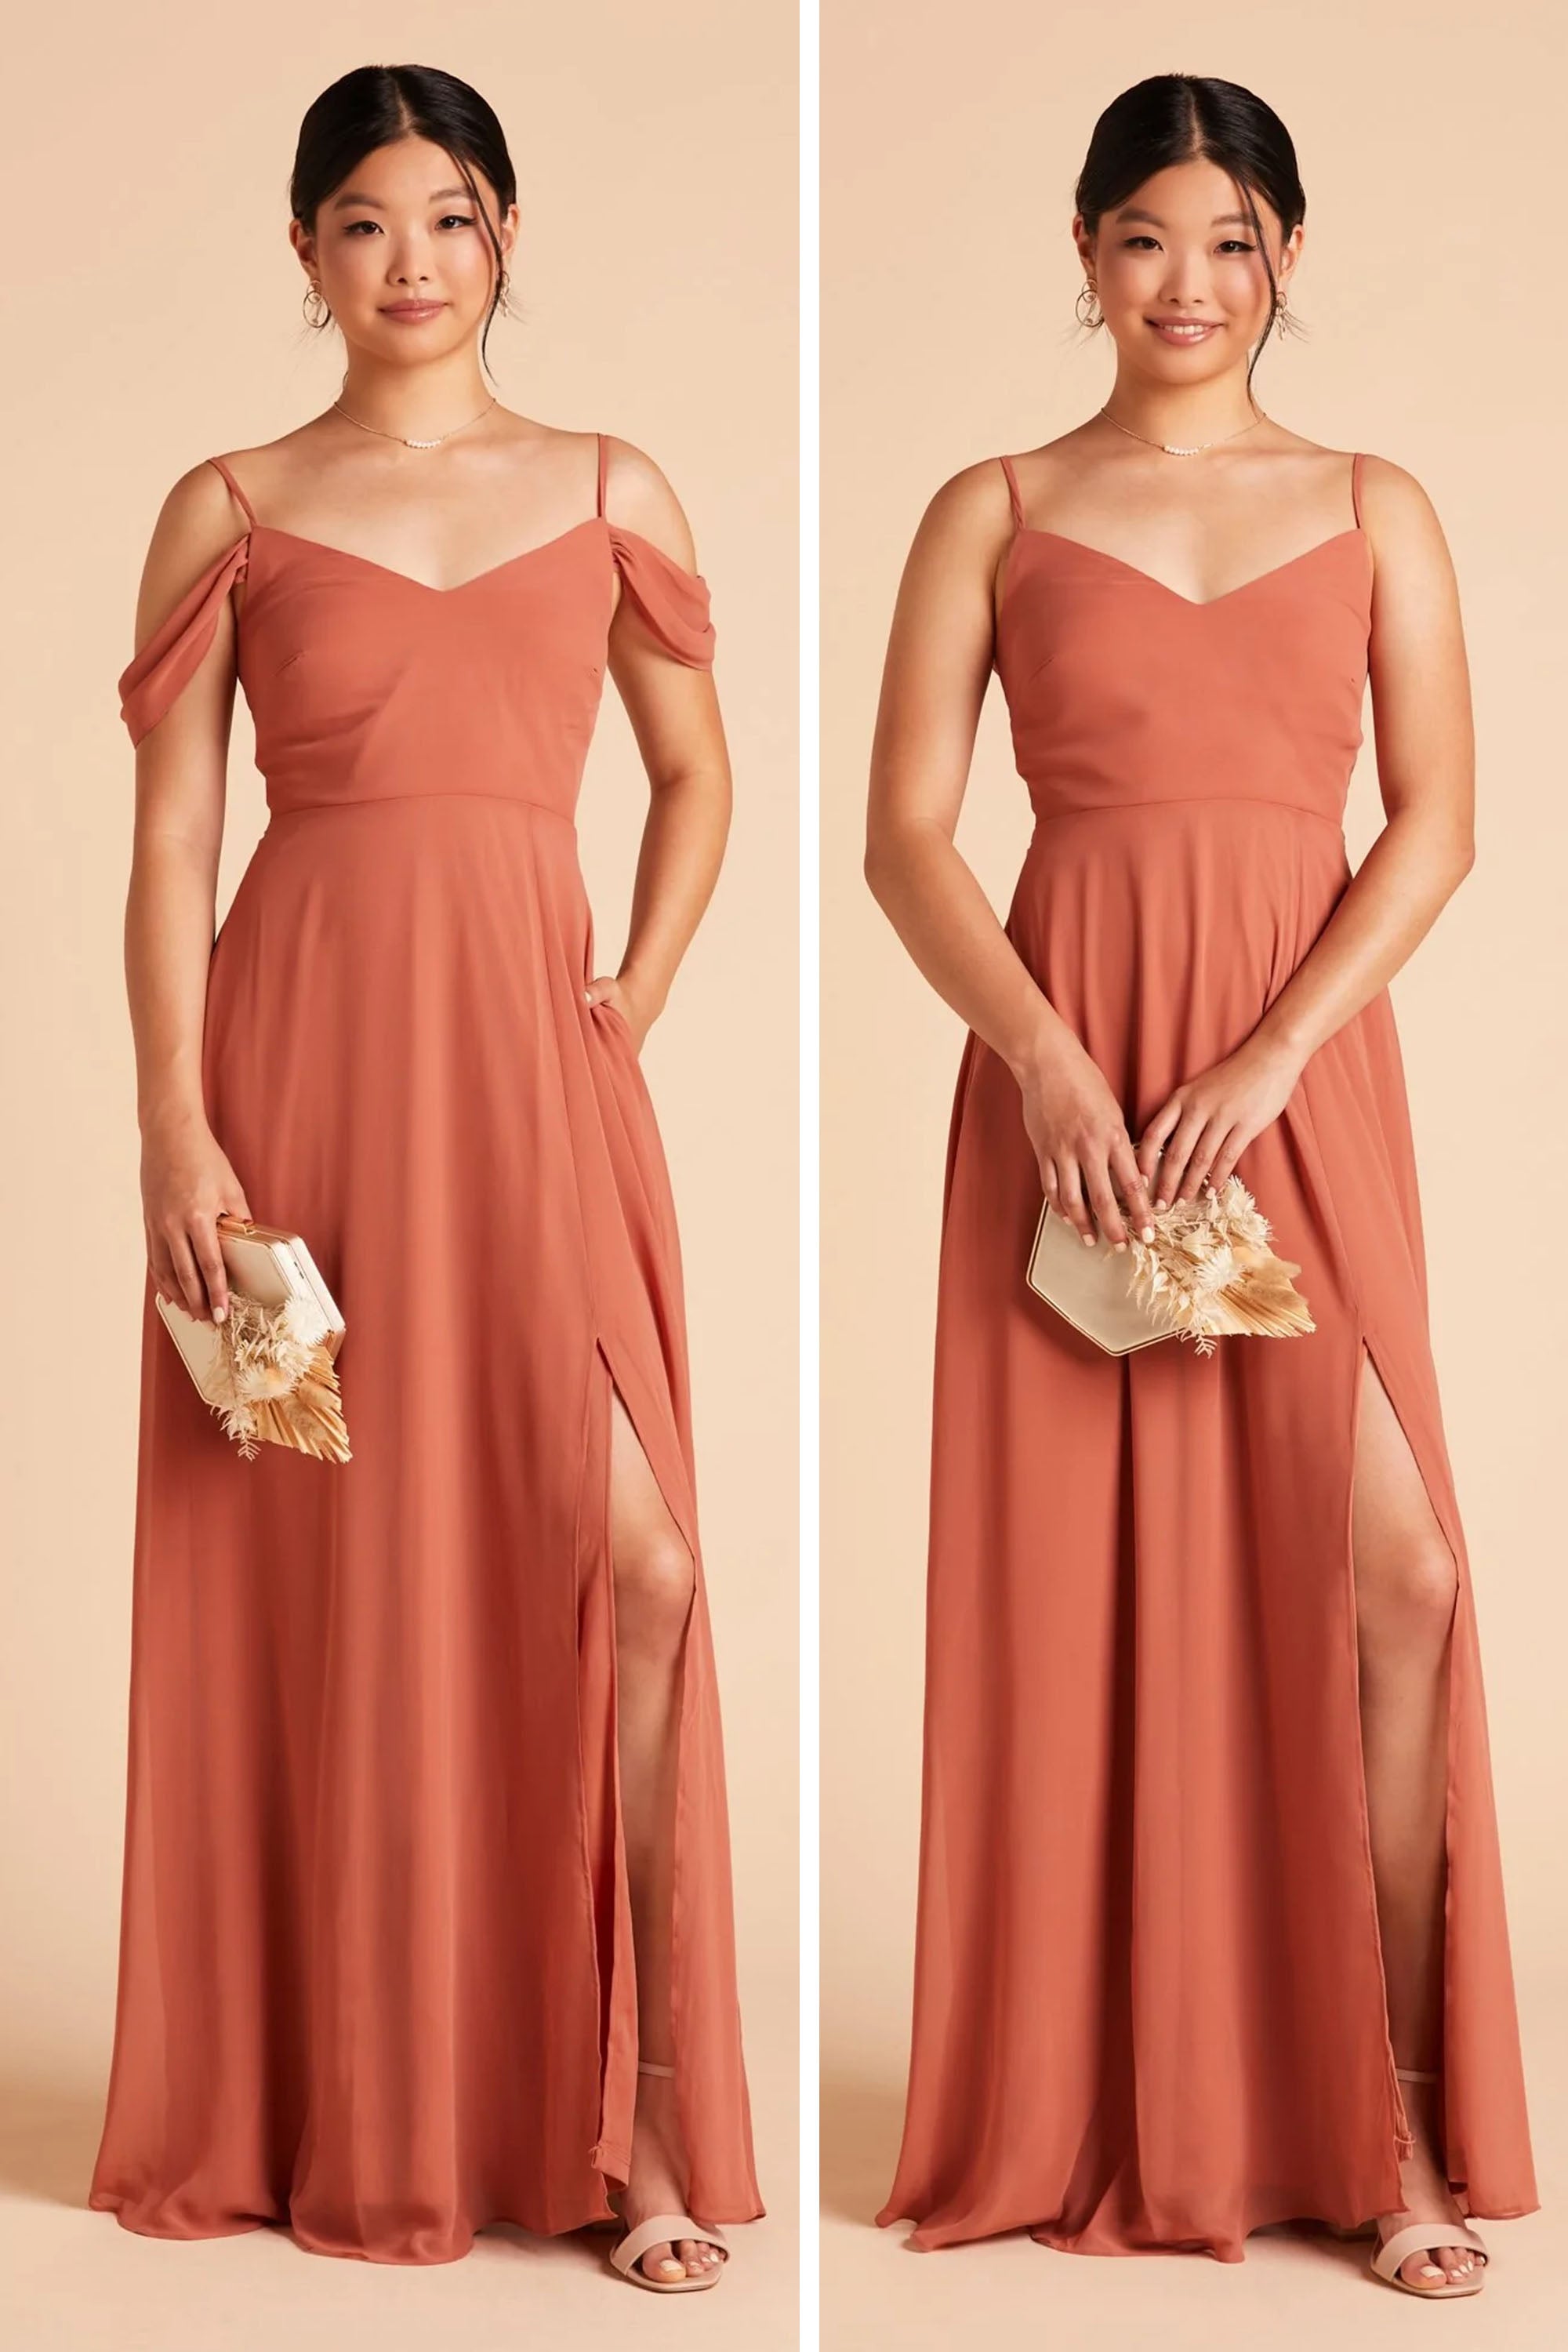 Devin Convertible Dress - Coral Pink